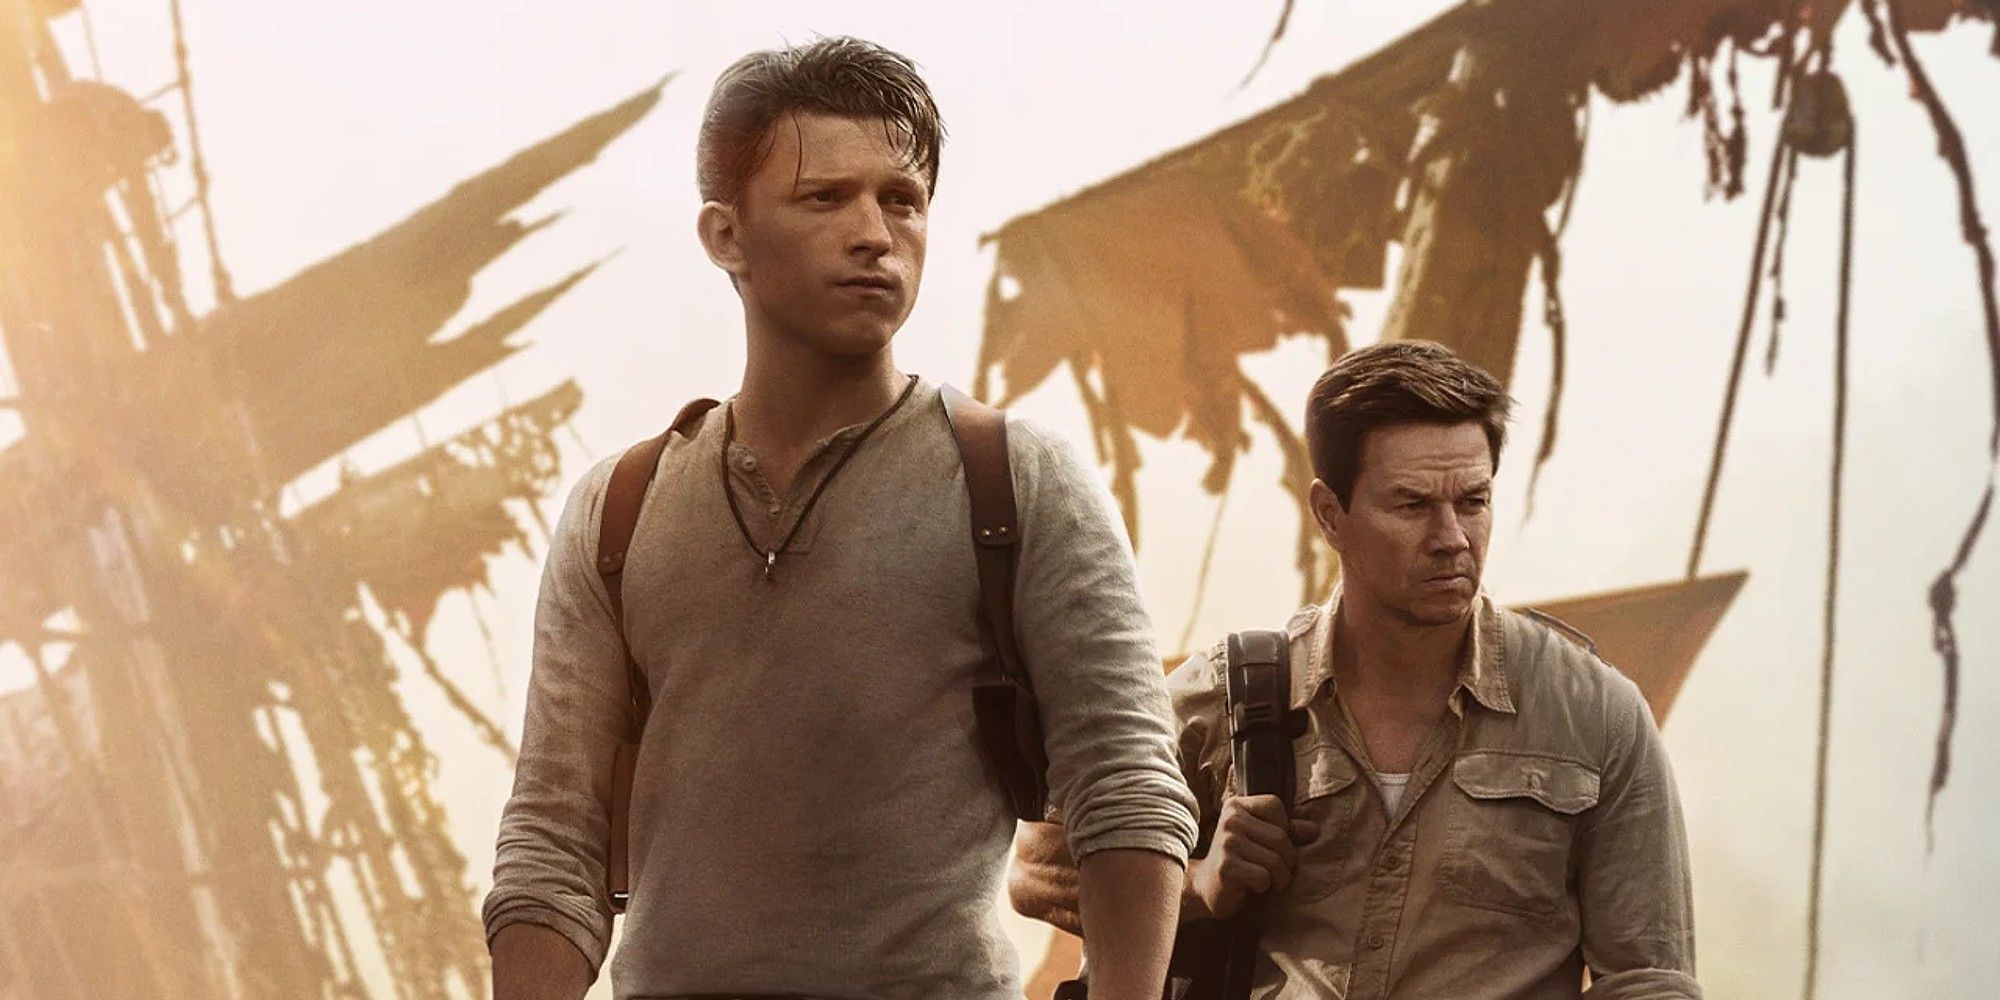 The Official Uncharted Movie Poster Is Out, And Fans Aren't Loving It